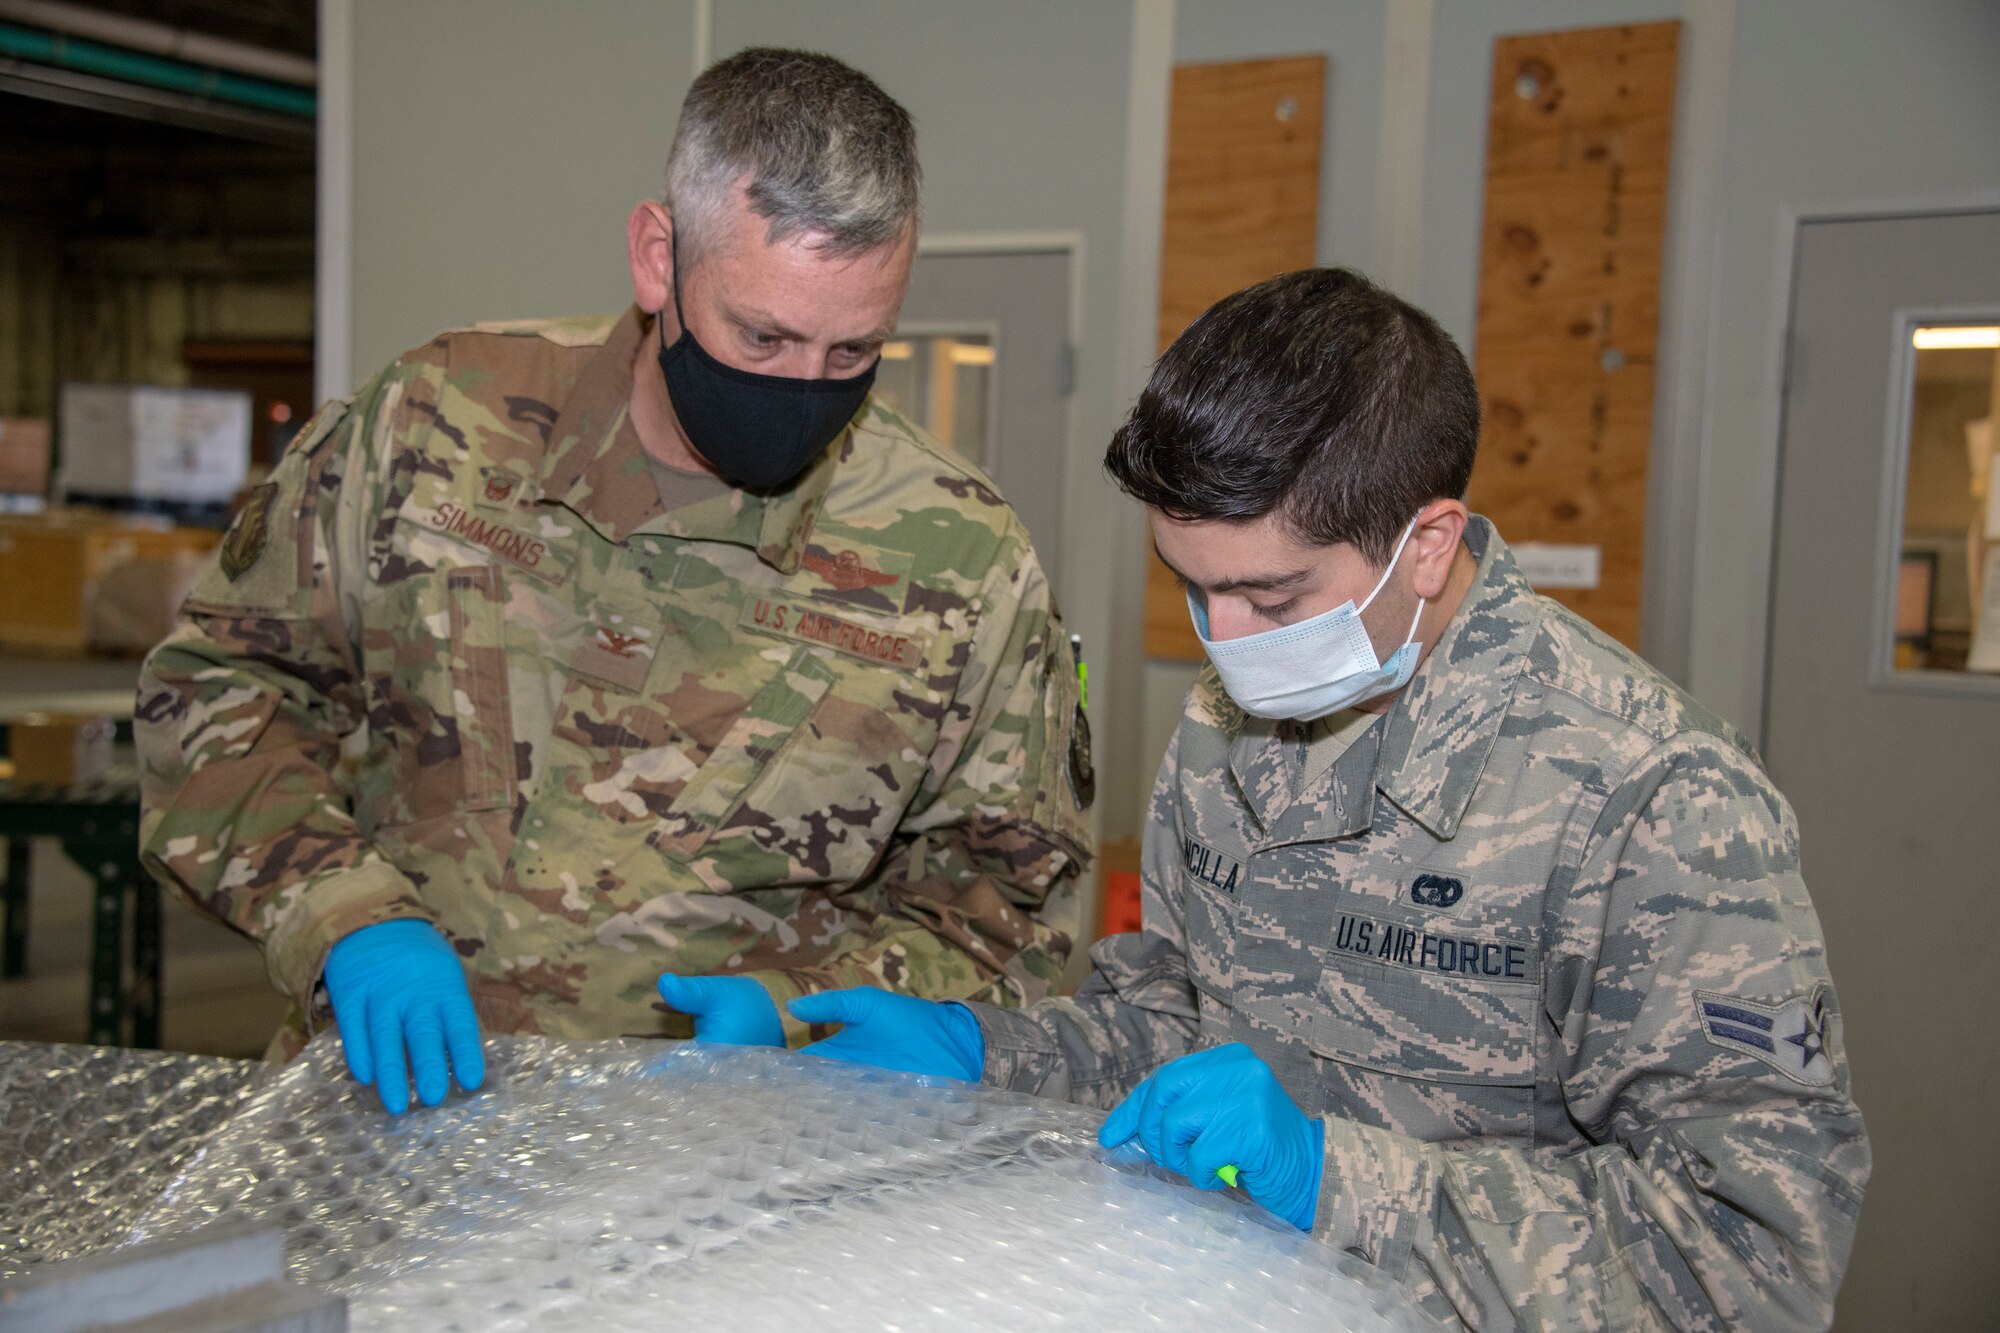 U.S. Air Force Col. Corey Simmons, left, 60th Air Mobility Wing commander, and Airman 1st Class Gregory Concilla, 60th Aerial Port Squadron packing and crating technician, measure packing material during Leadership Rounds July 24, 2020, at Travis Air Force Base, California. The 60th APS is the United States Transportation Command's primary west coast aerial port providing global and passenger distribution for the United States and its Allies. The Leadership Rounds program provides 60th AMW leadership an opportunity to interact with Airmen and get a detailed view of each mission performed at Travis AFB. (U.S. Air Force photo by Heide Couch)